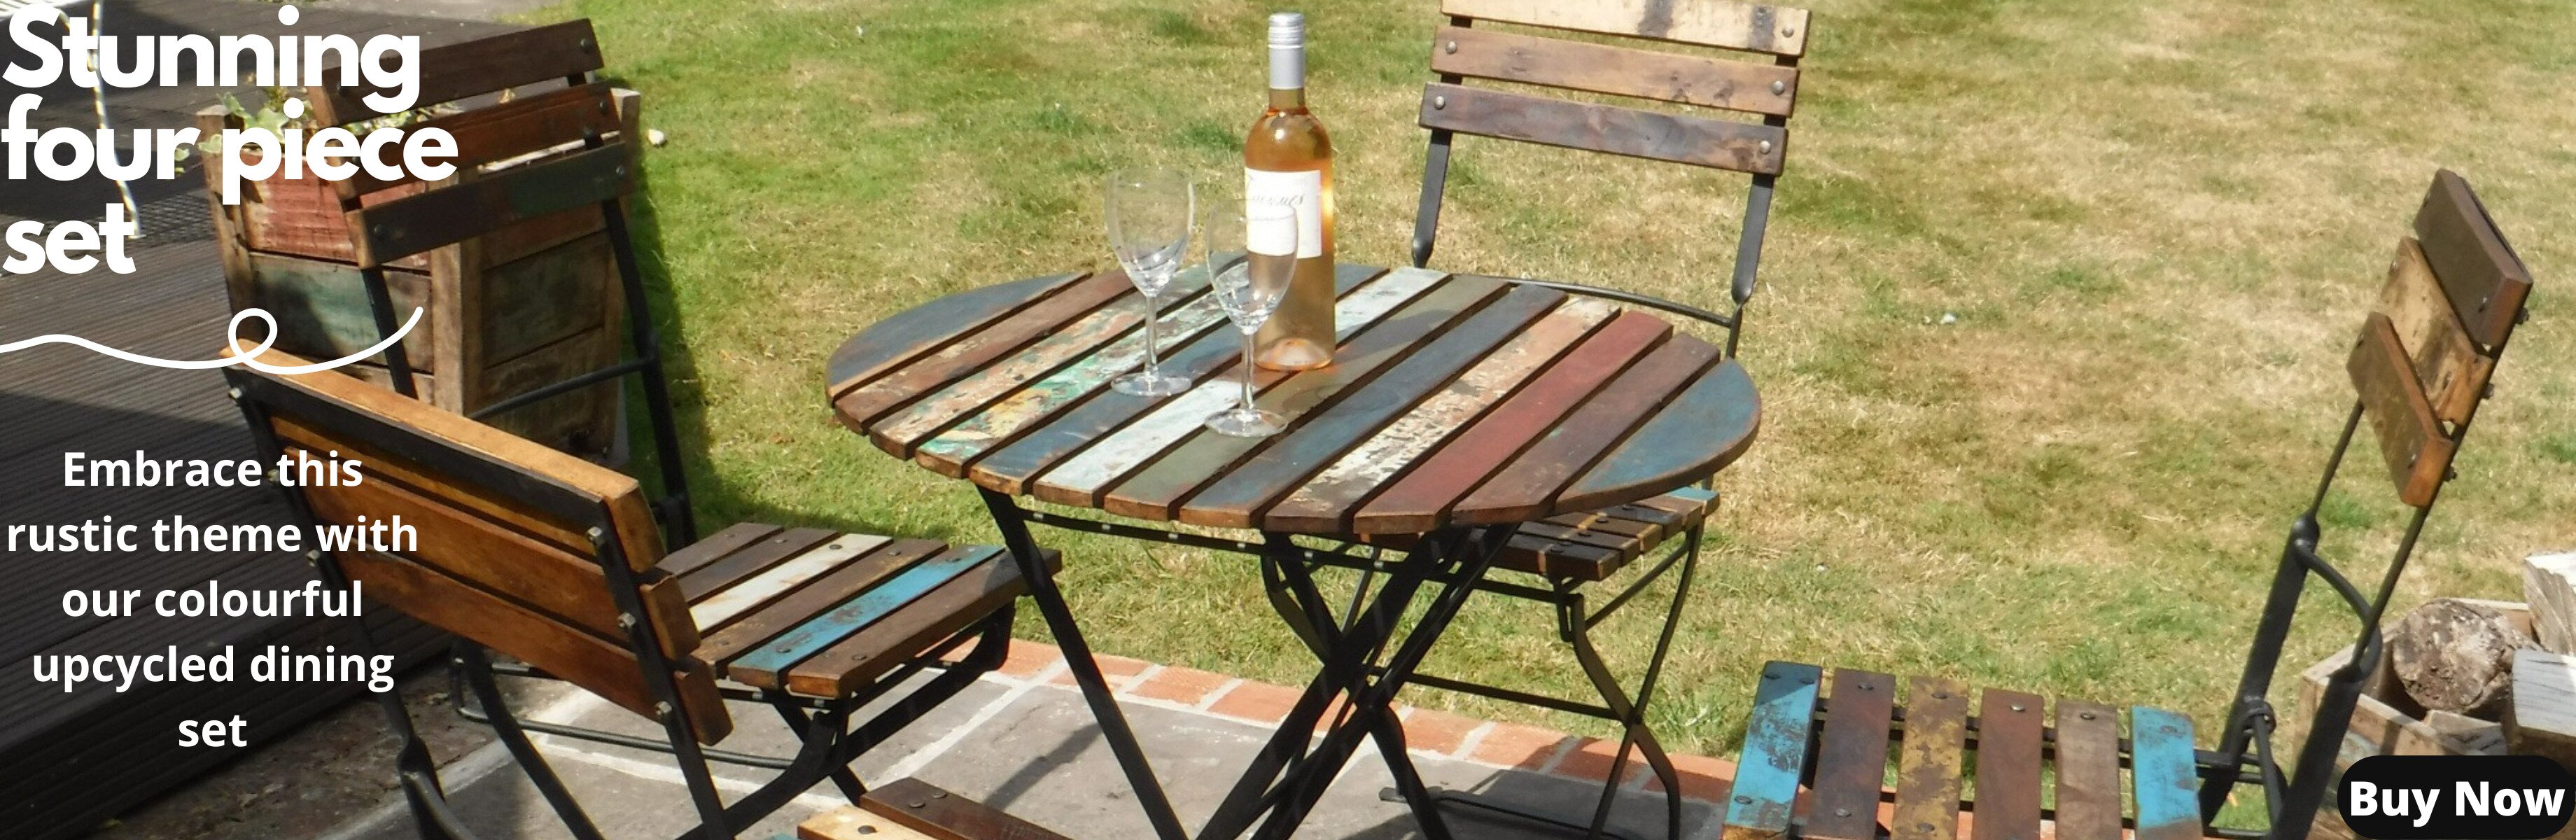 Upcycled table set